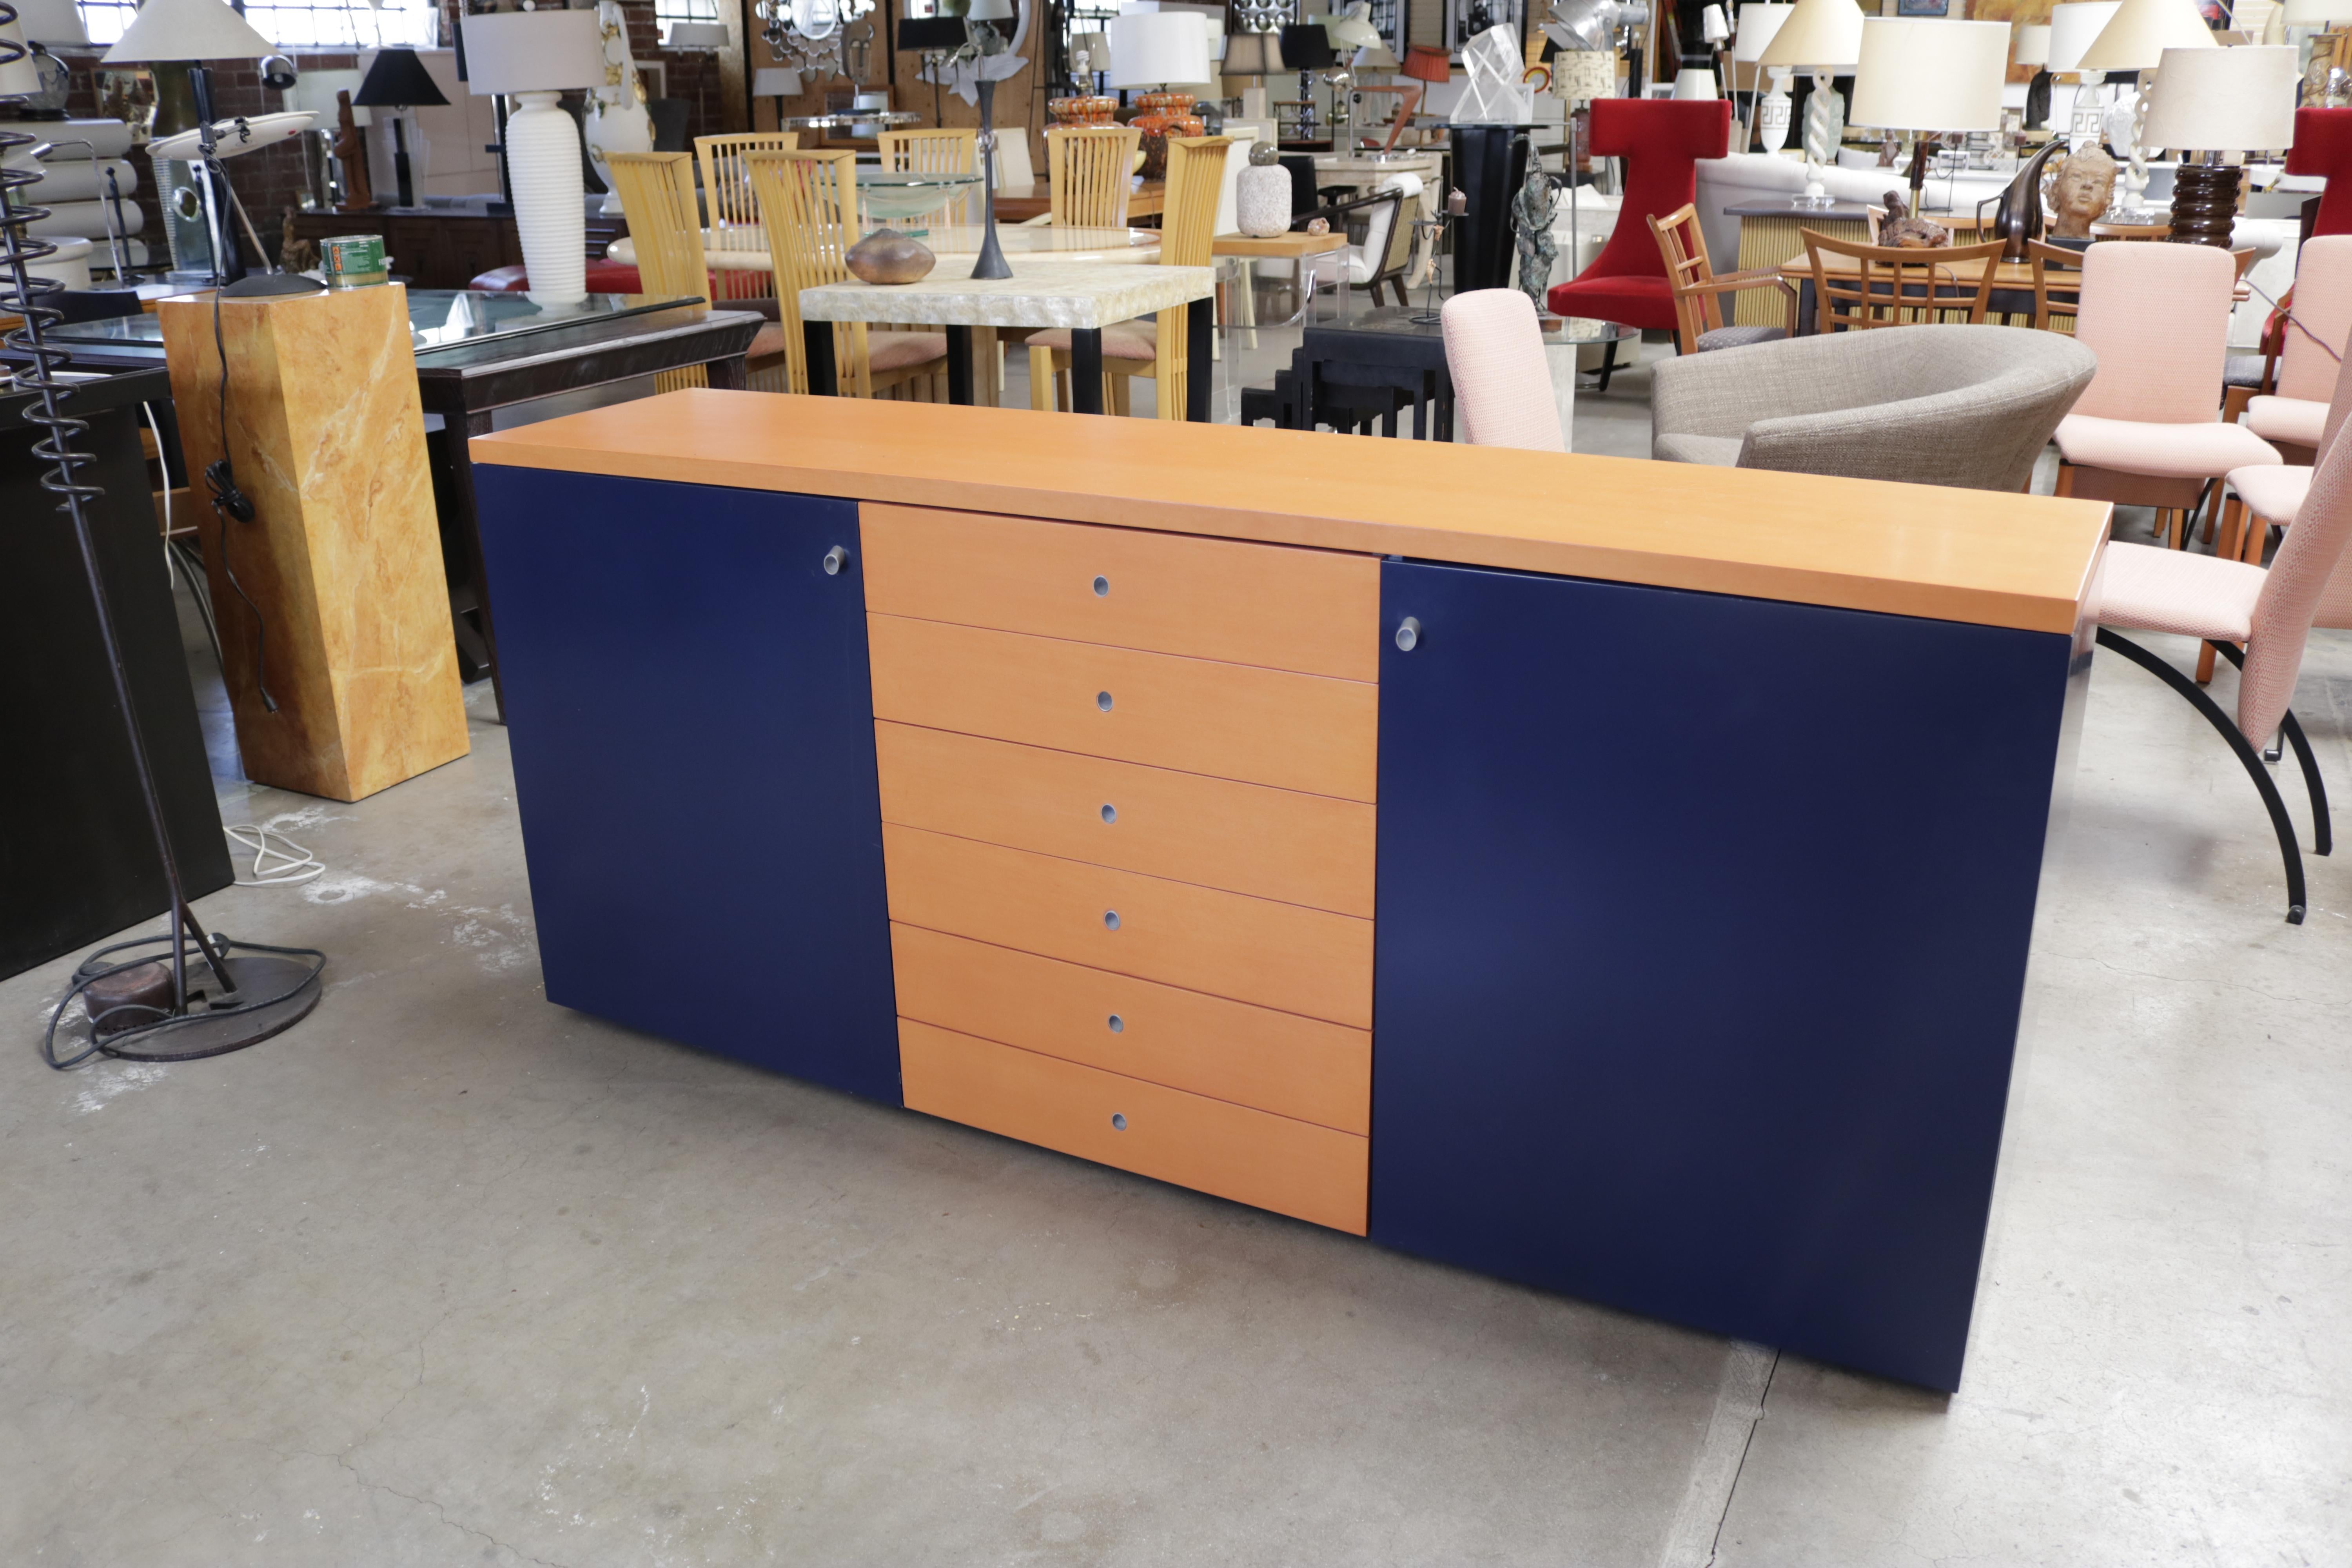 A two-toned buffet in terracotta orange and navy blue stained wood, with brushed steel accented pulls. There are six center drawers. The left side door has 3 shelves and the right side door has 2 shelves.

Manufactured by Castelijn Meubelindustrie